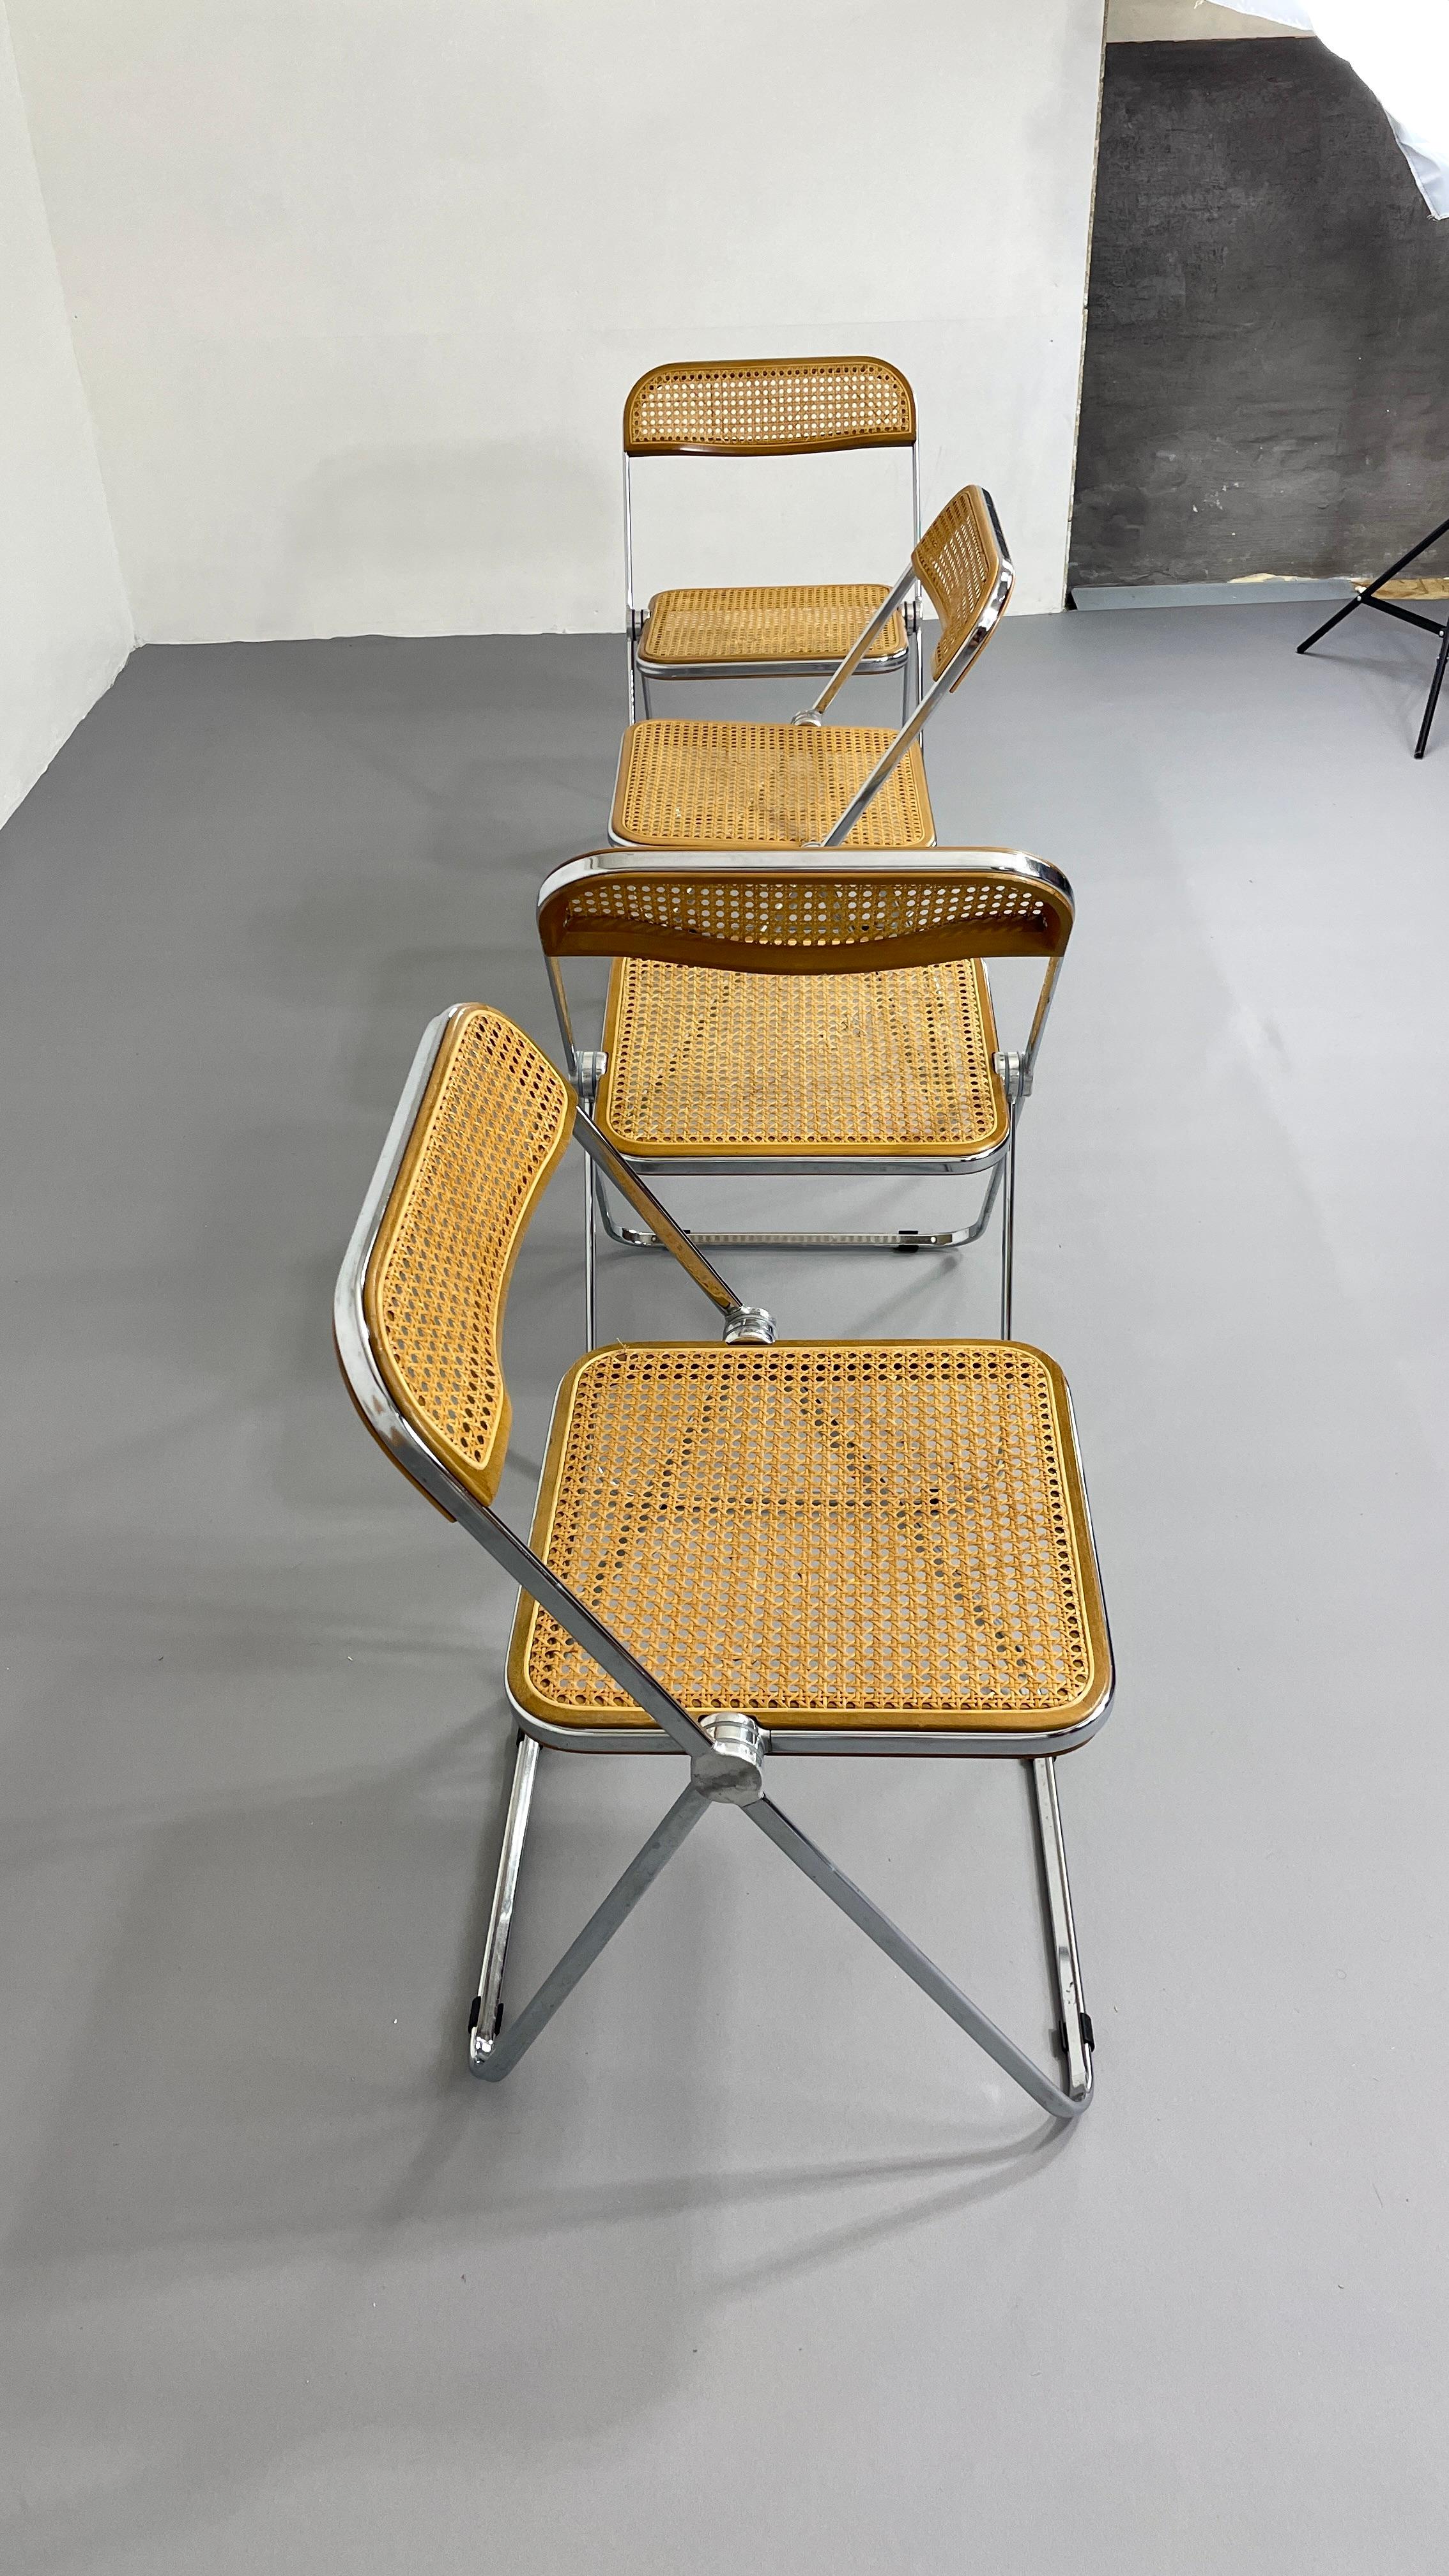 Post-Modern 1960s Plia Folding Chair with Woven Wicker Giancarlo Piretti for Castelli, 1967 For Sale